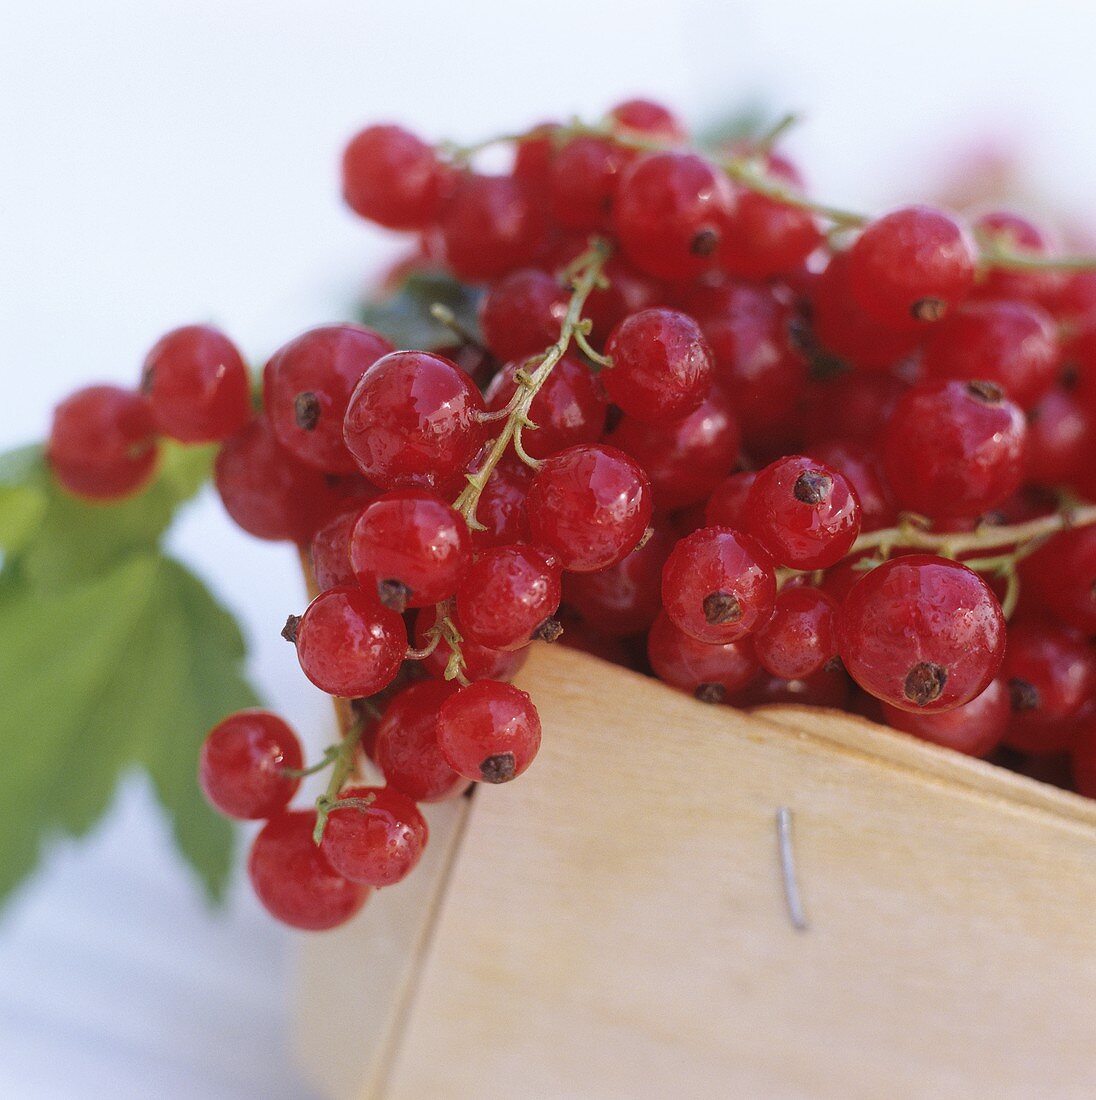 Red currants in punnet